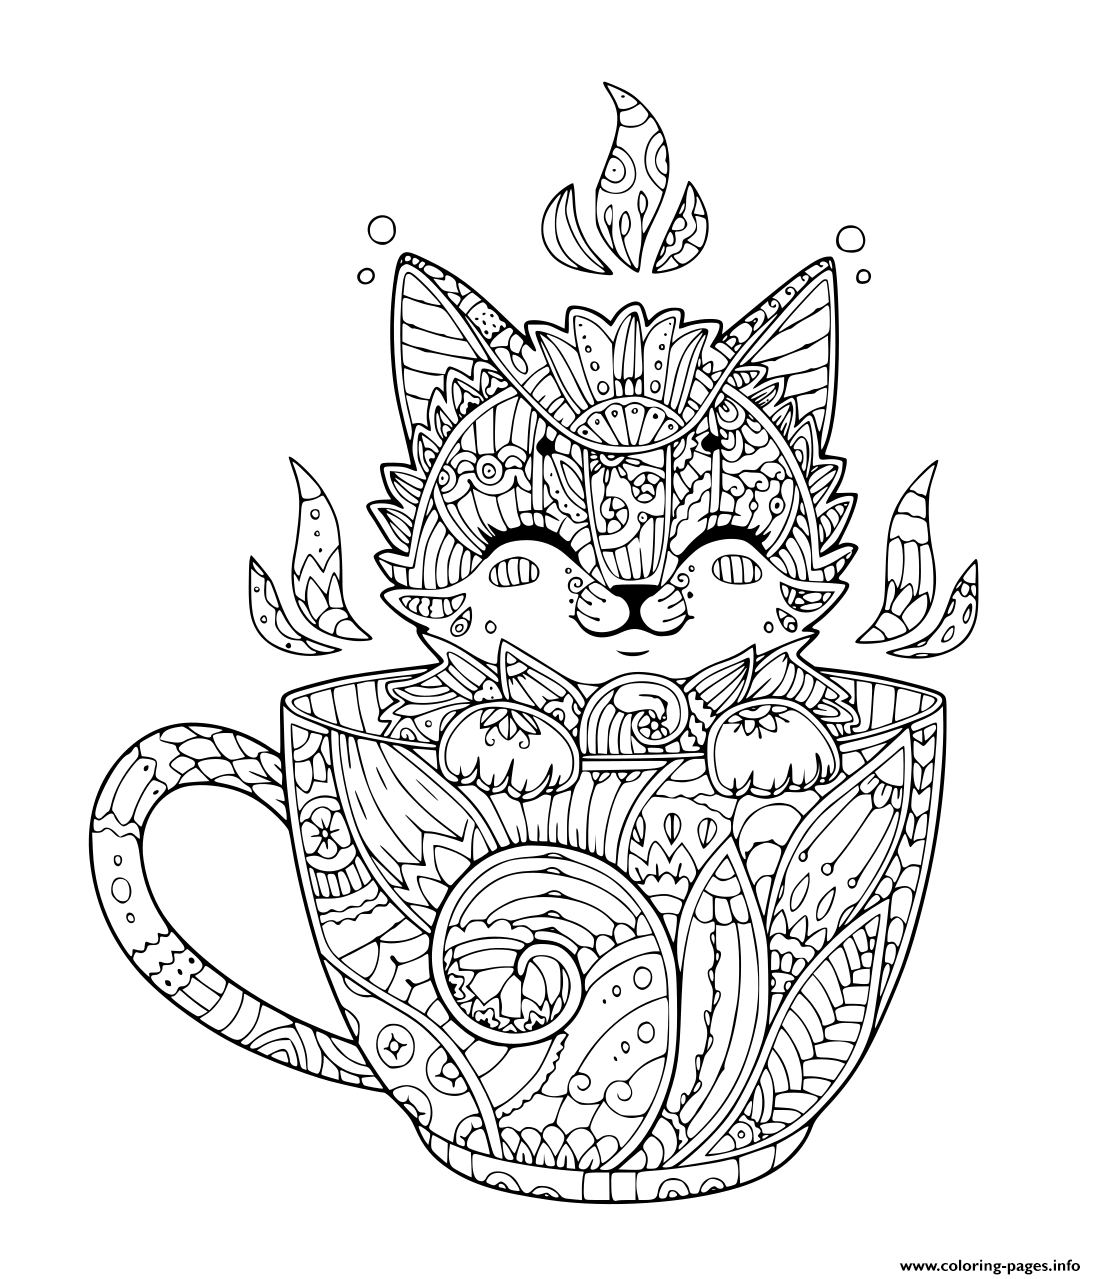 Download Little Kitten In Coffee Cup For Relaxation Coloring Pages Printable